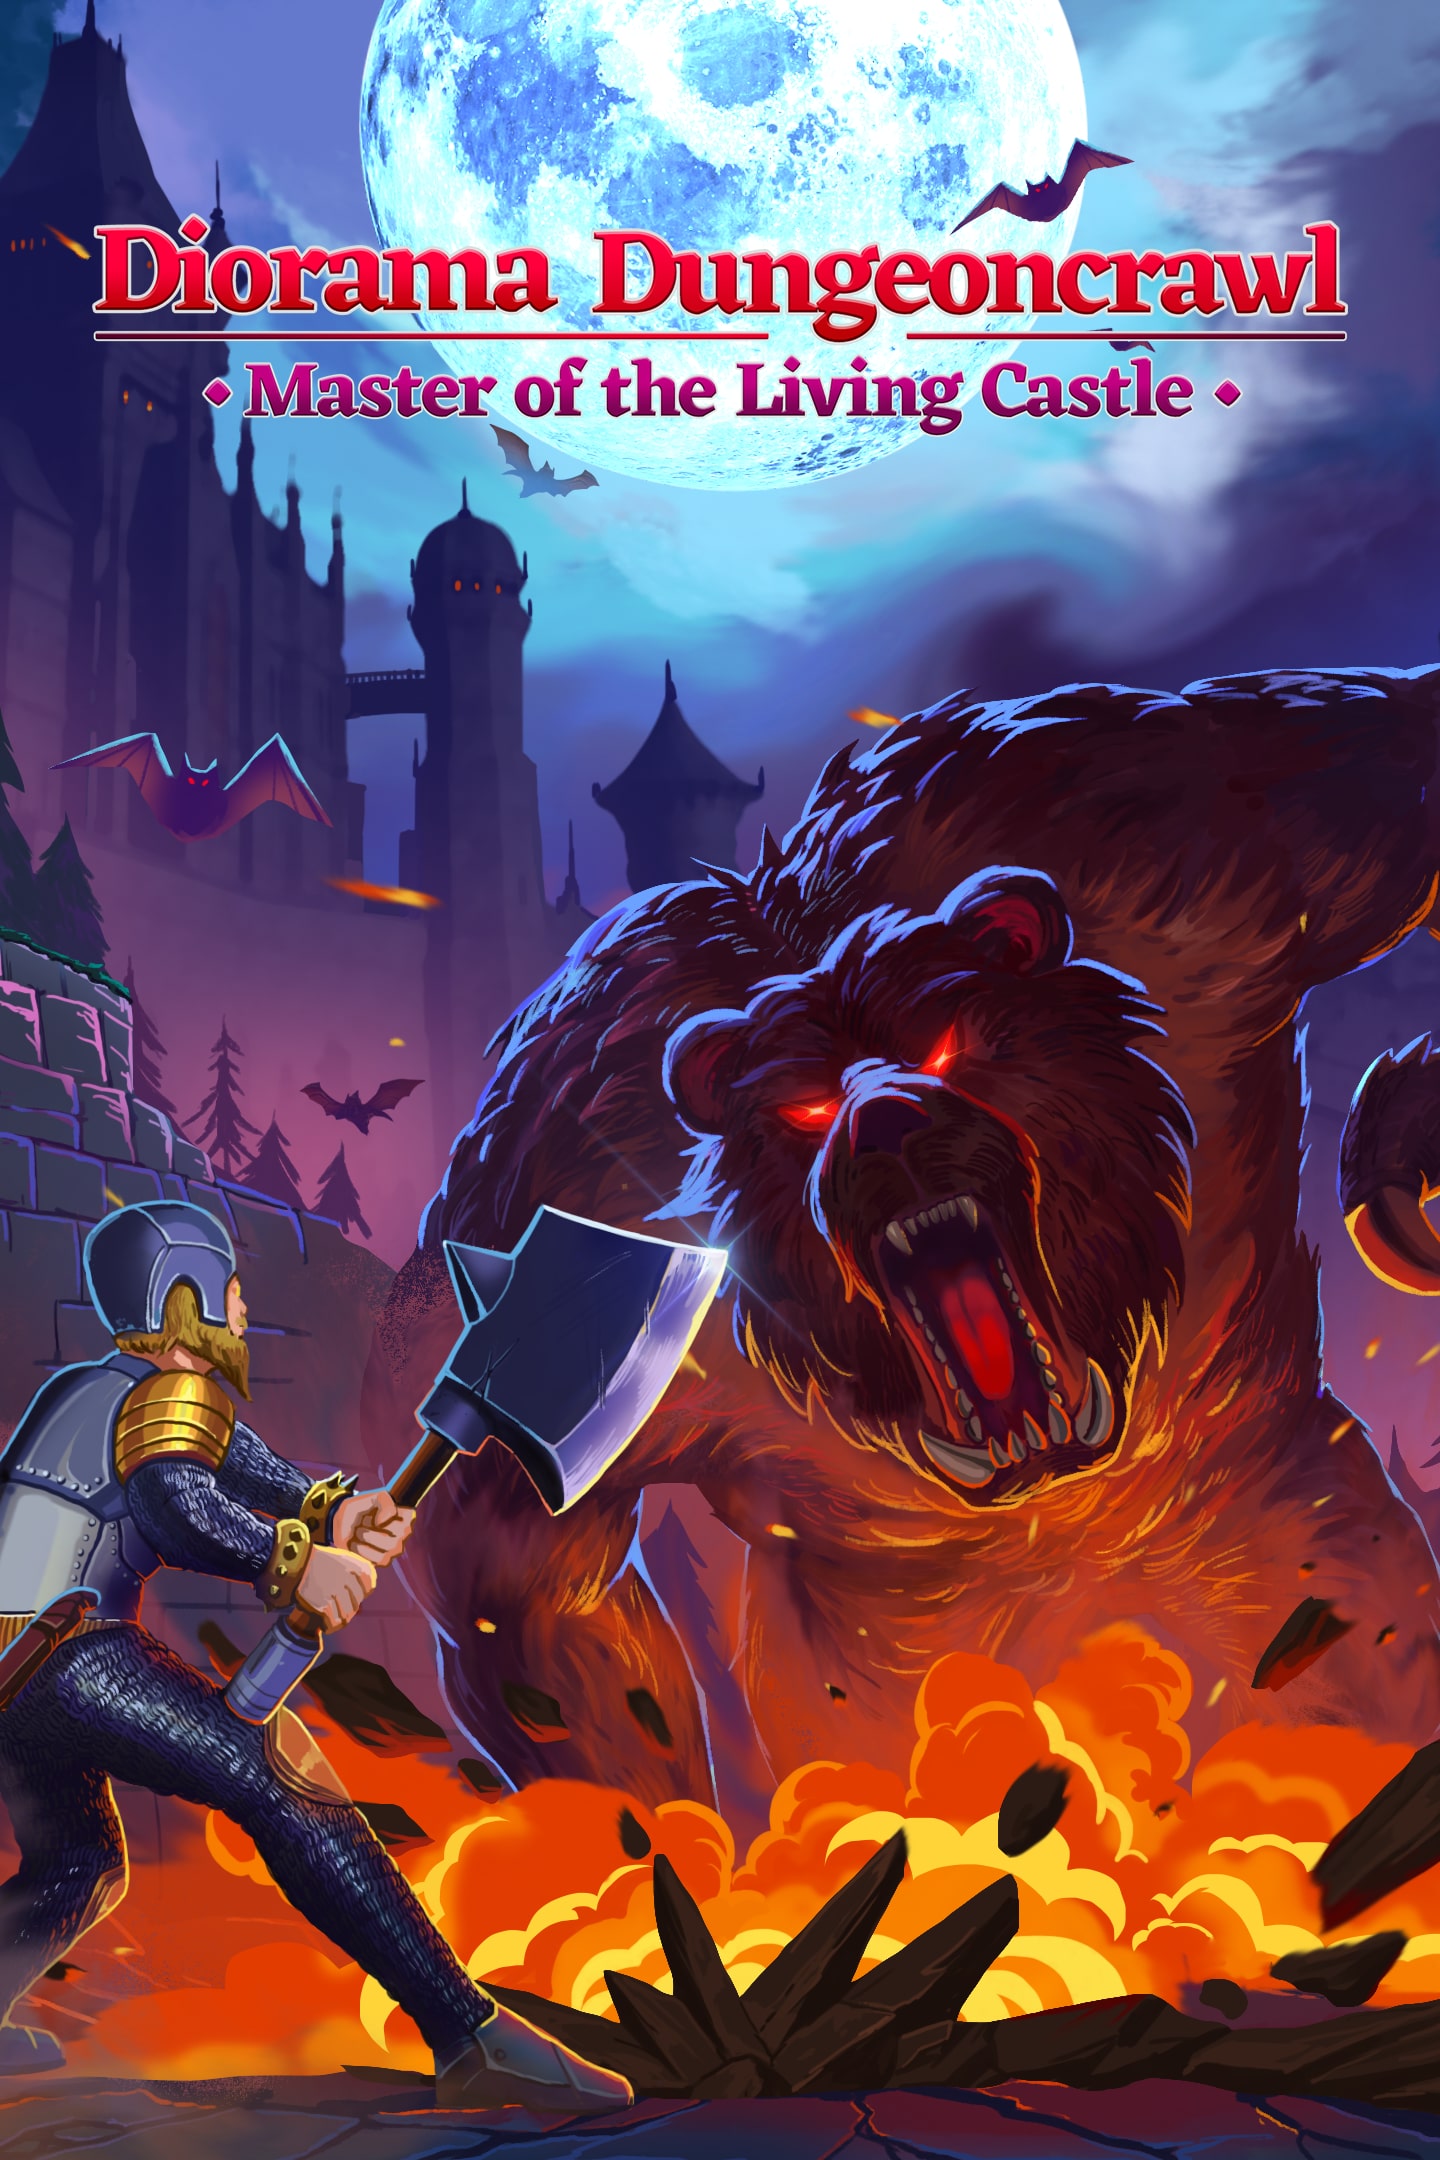 Buy Diorama Dungeoncrawl - Master of the Living Castle